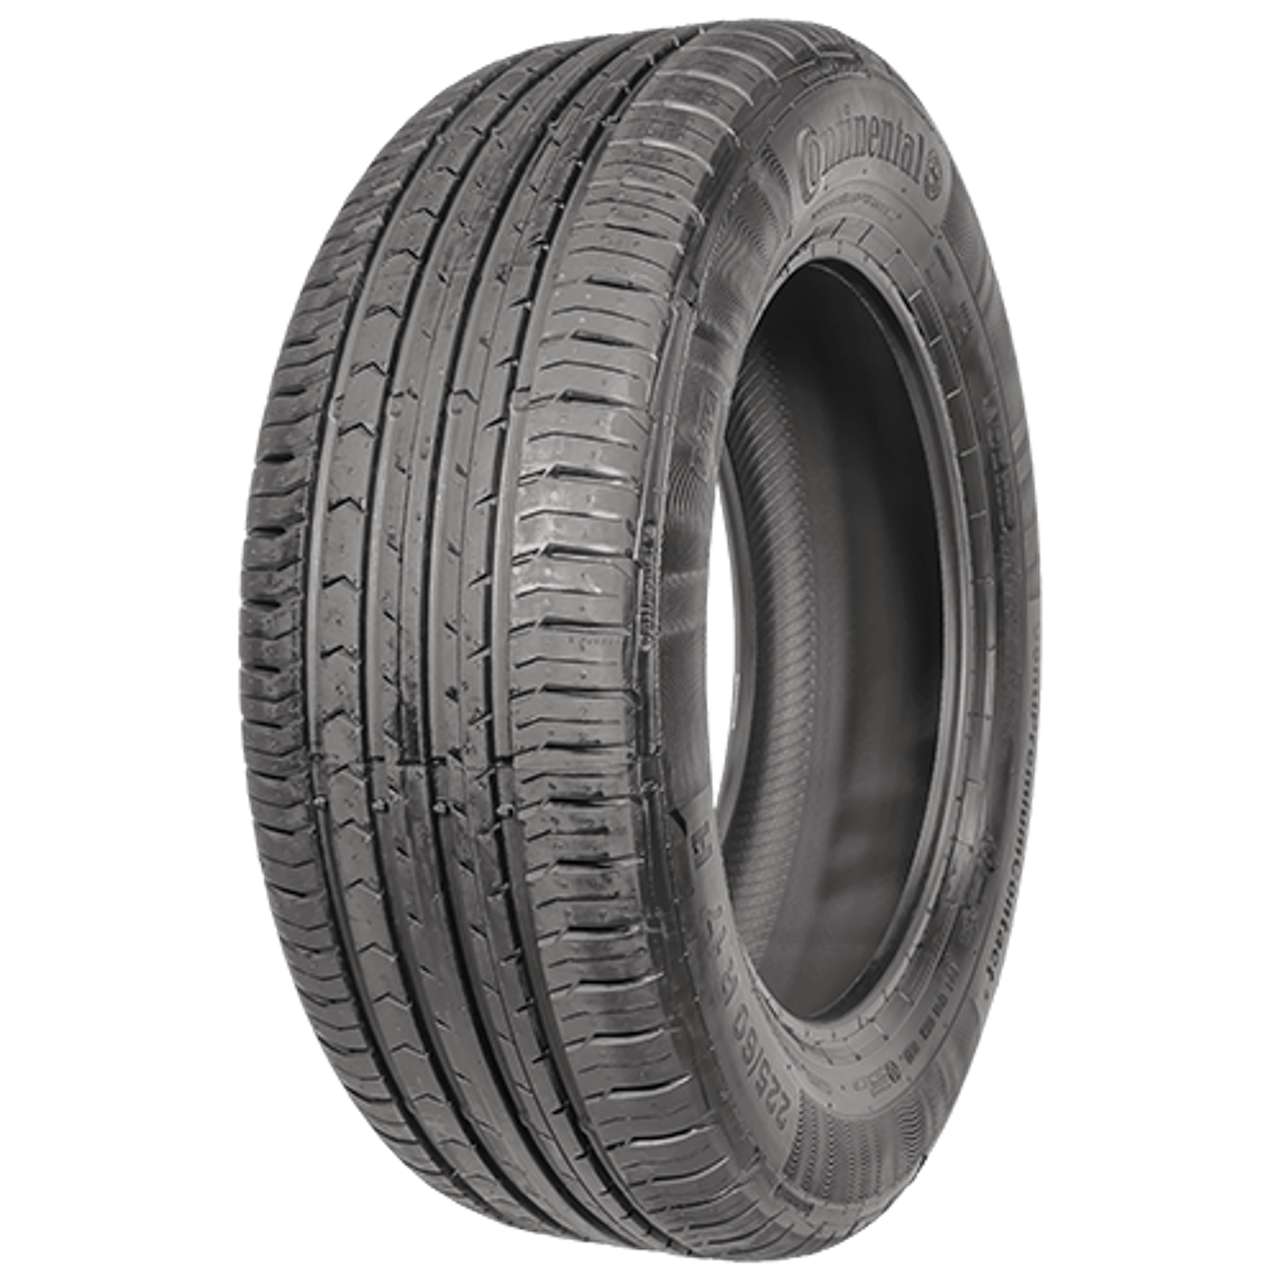 CONTINENTAL CONTIPREMIUMCONTACT 5 (AO) 205/55R16 91W 